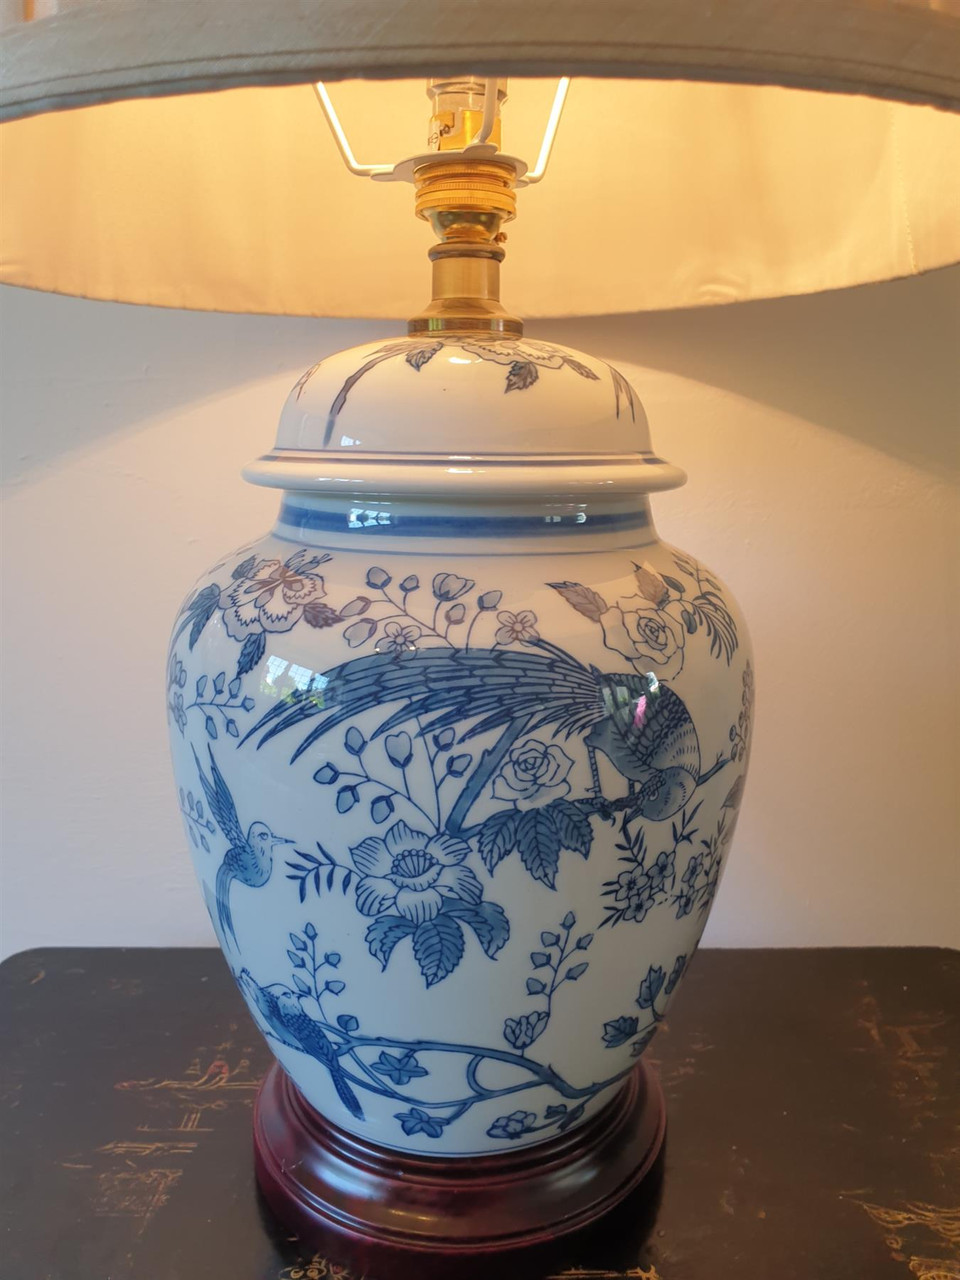 Pair of Chinese General Jar Table Lamps with Shades - Blue Tropical Birds - 55cm